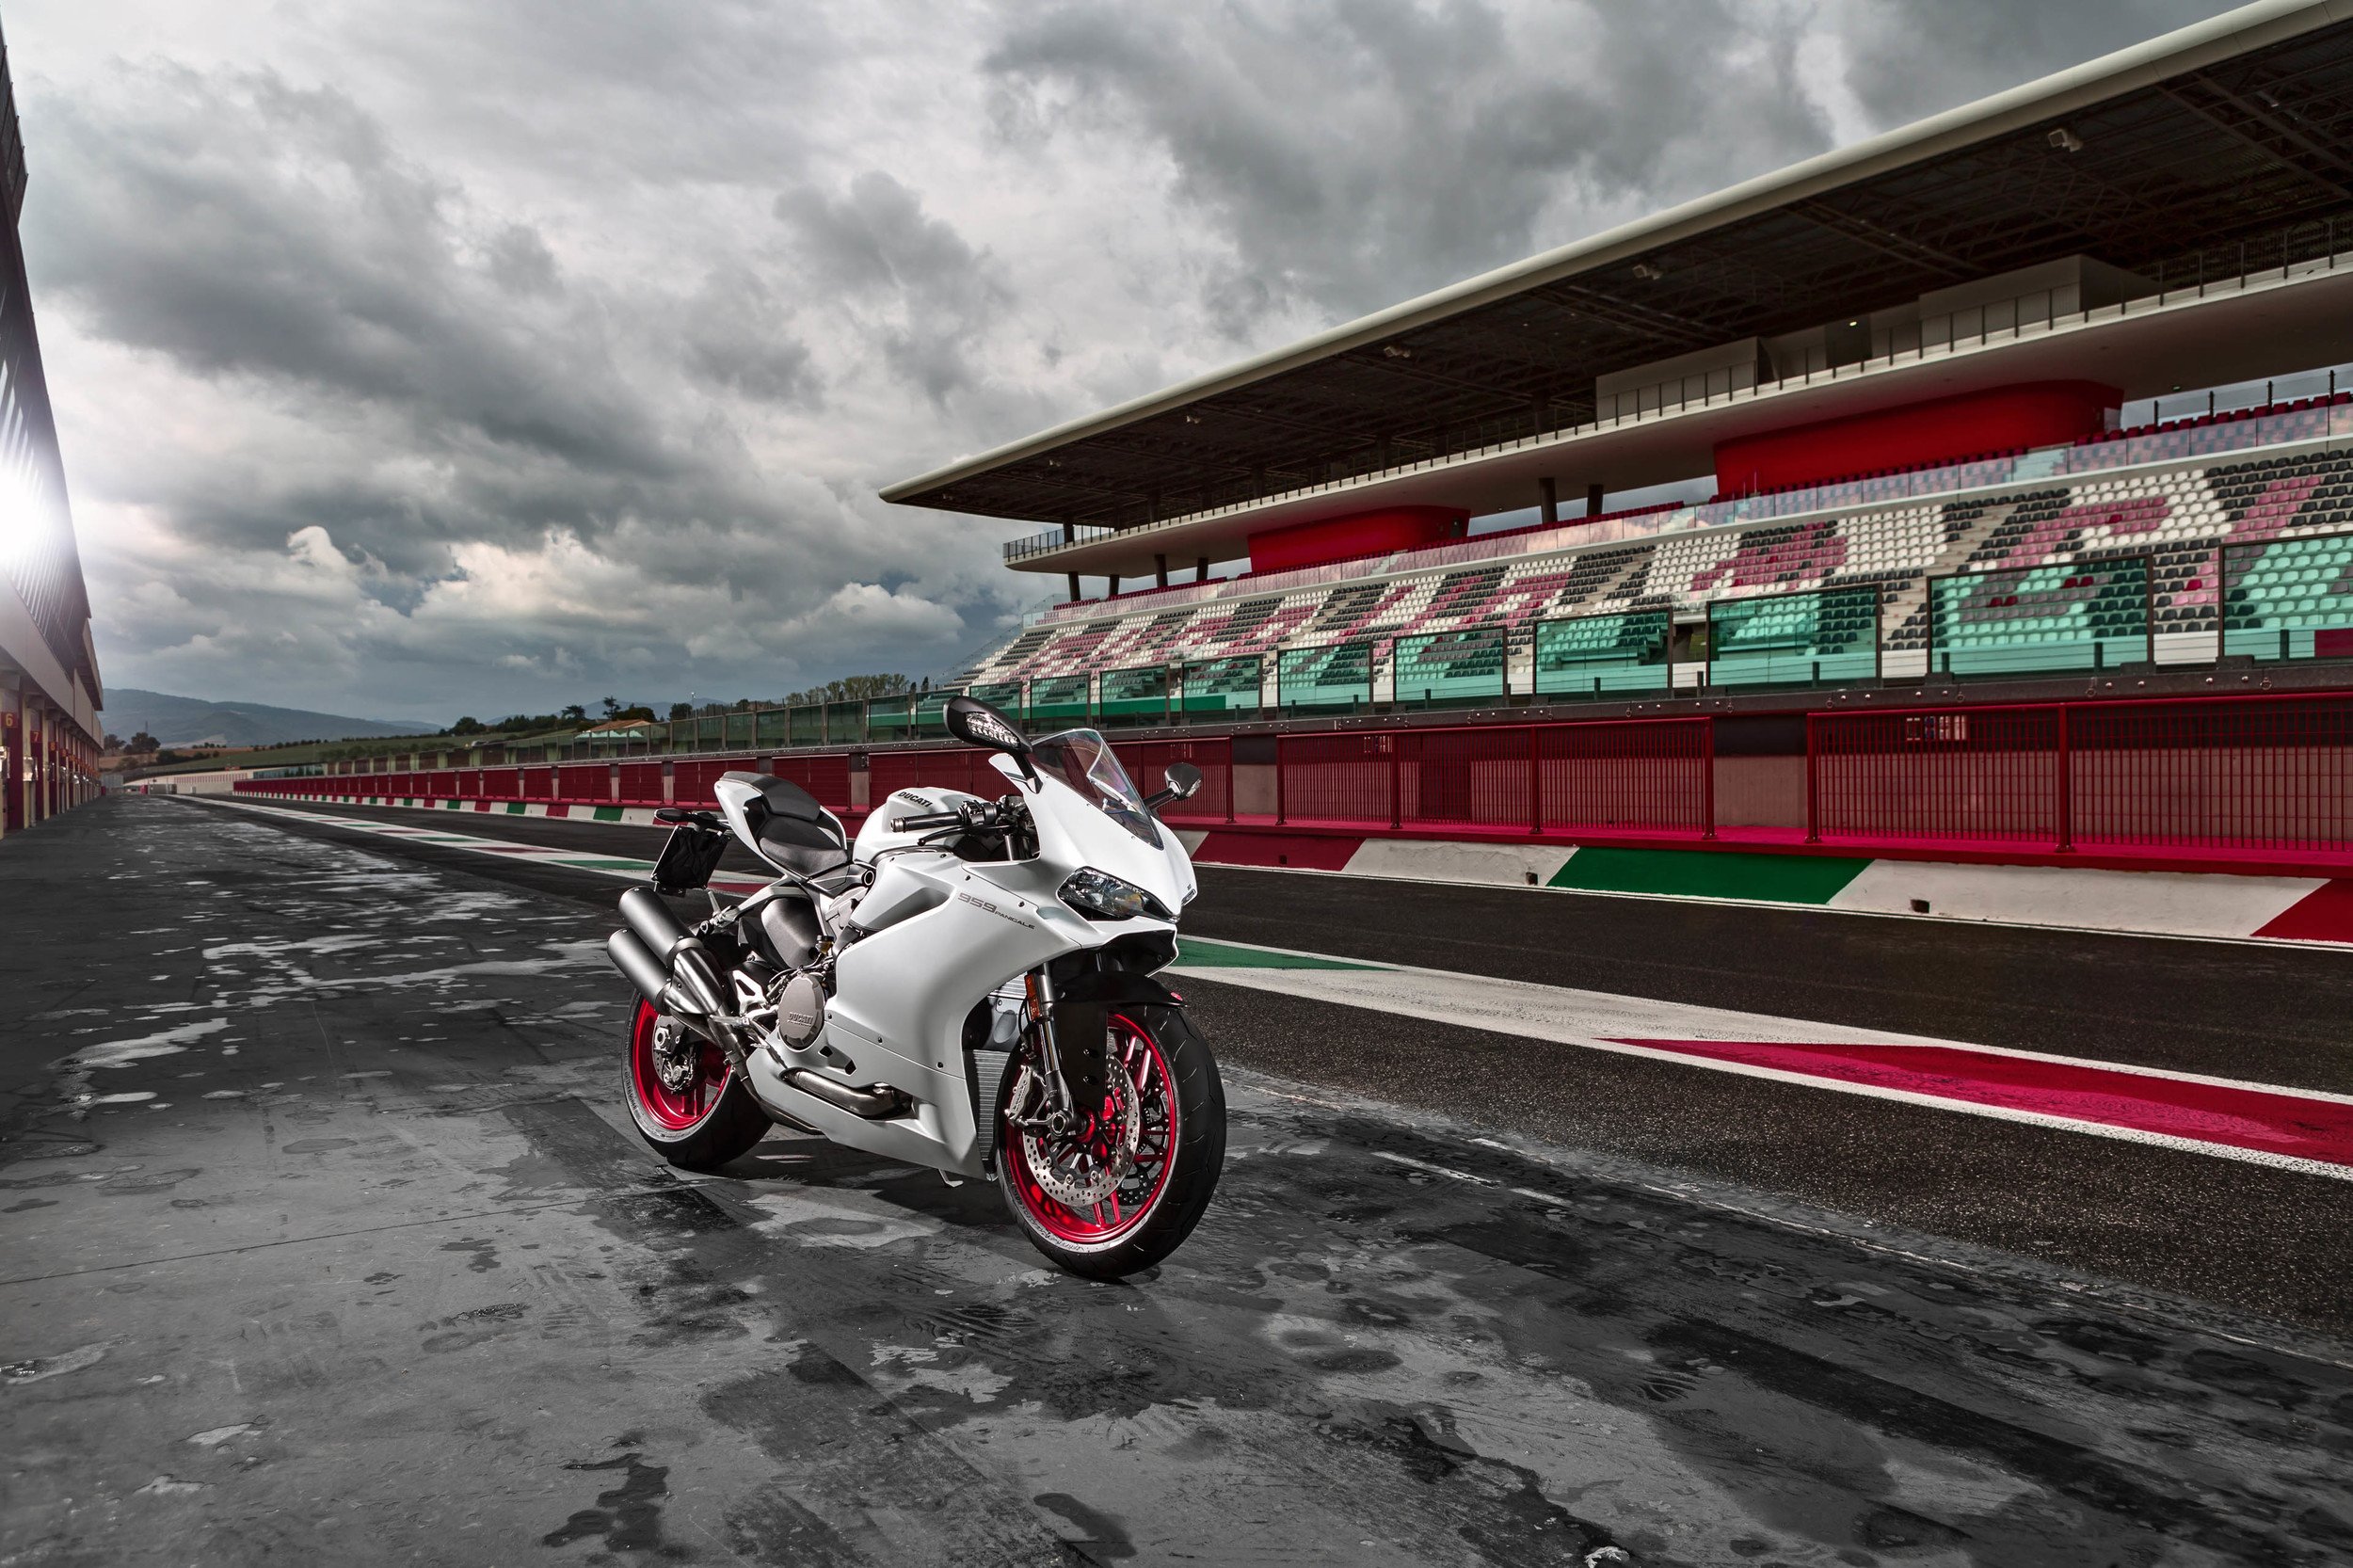 Ducati Panigale 959 2016 motocycles wallpaper background 2500x1666